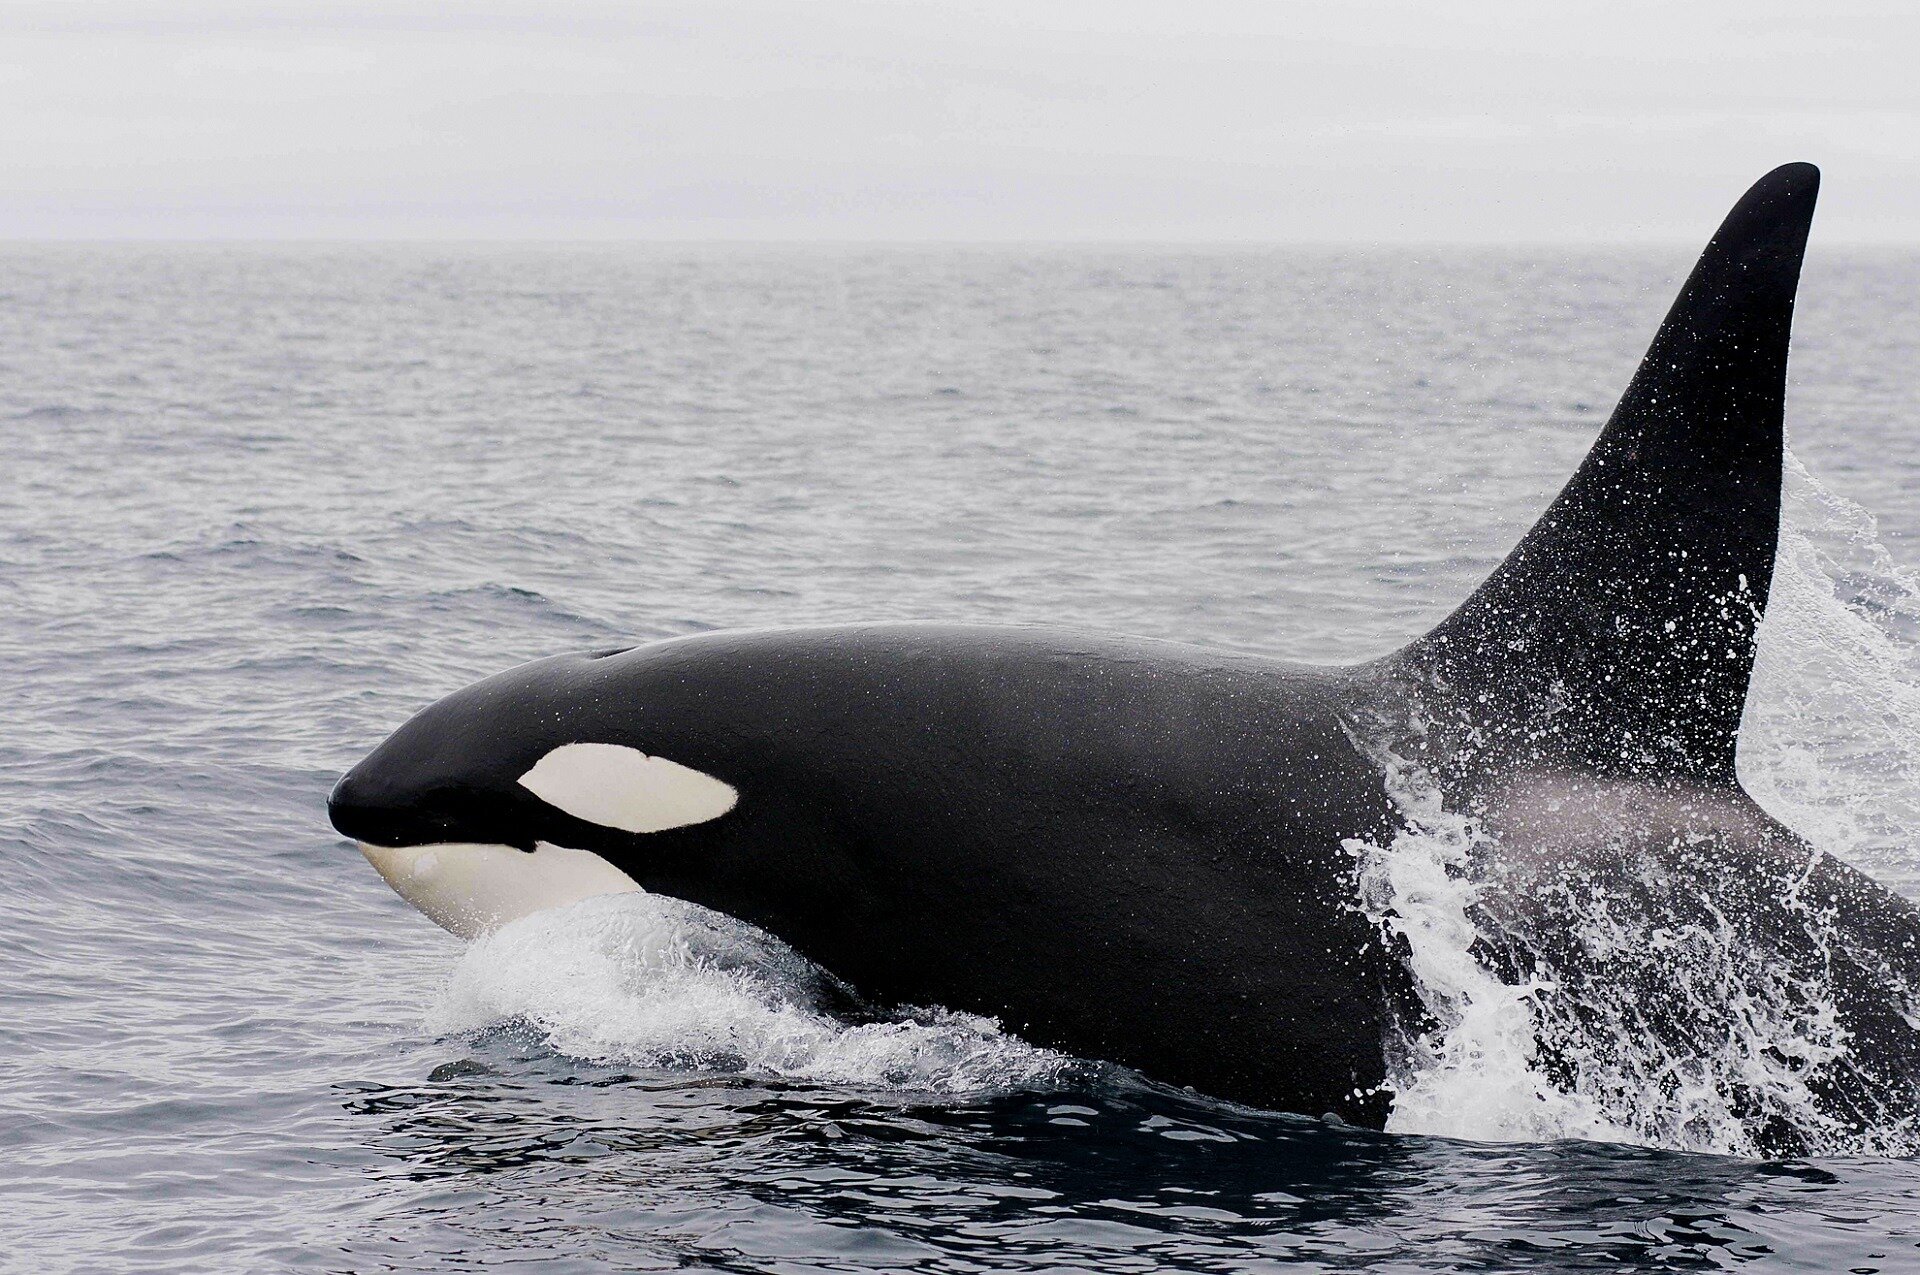 Apparent new orca calf spotted in endangered pod near British Columbia